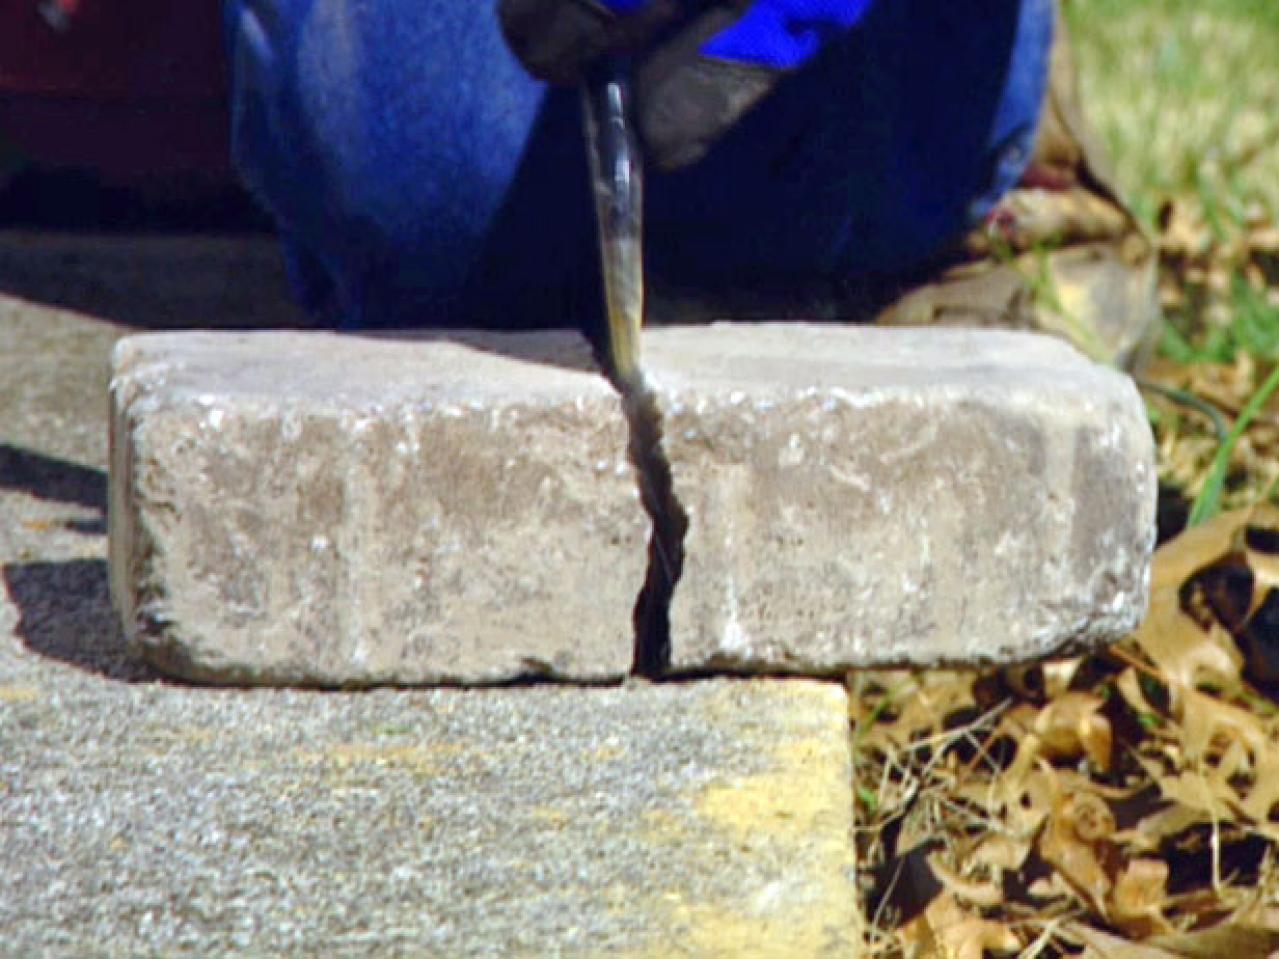 How To Build A Paver Patio How Tos Diy,10 Year Wedding Anniversary Cake